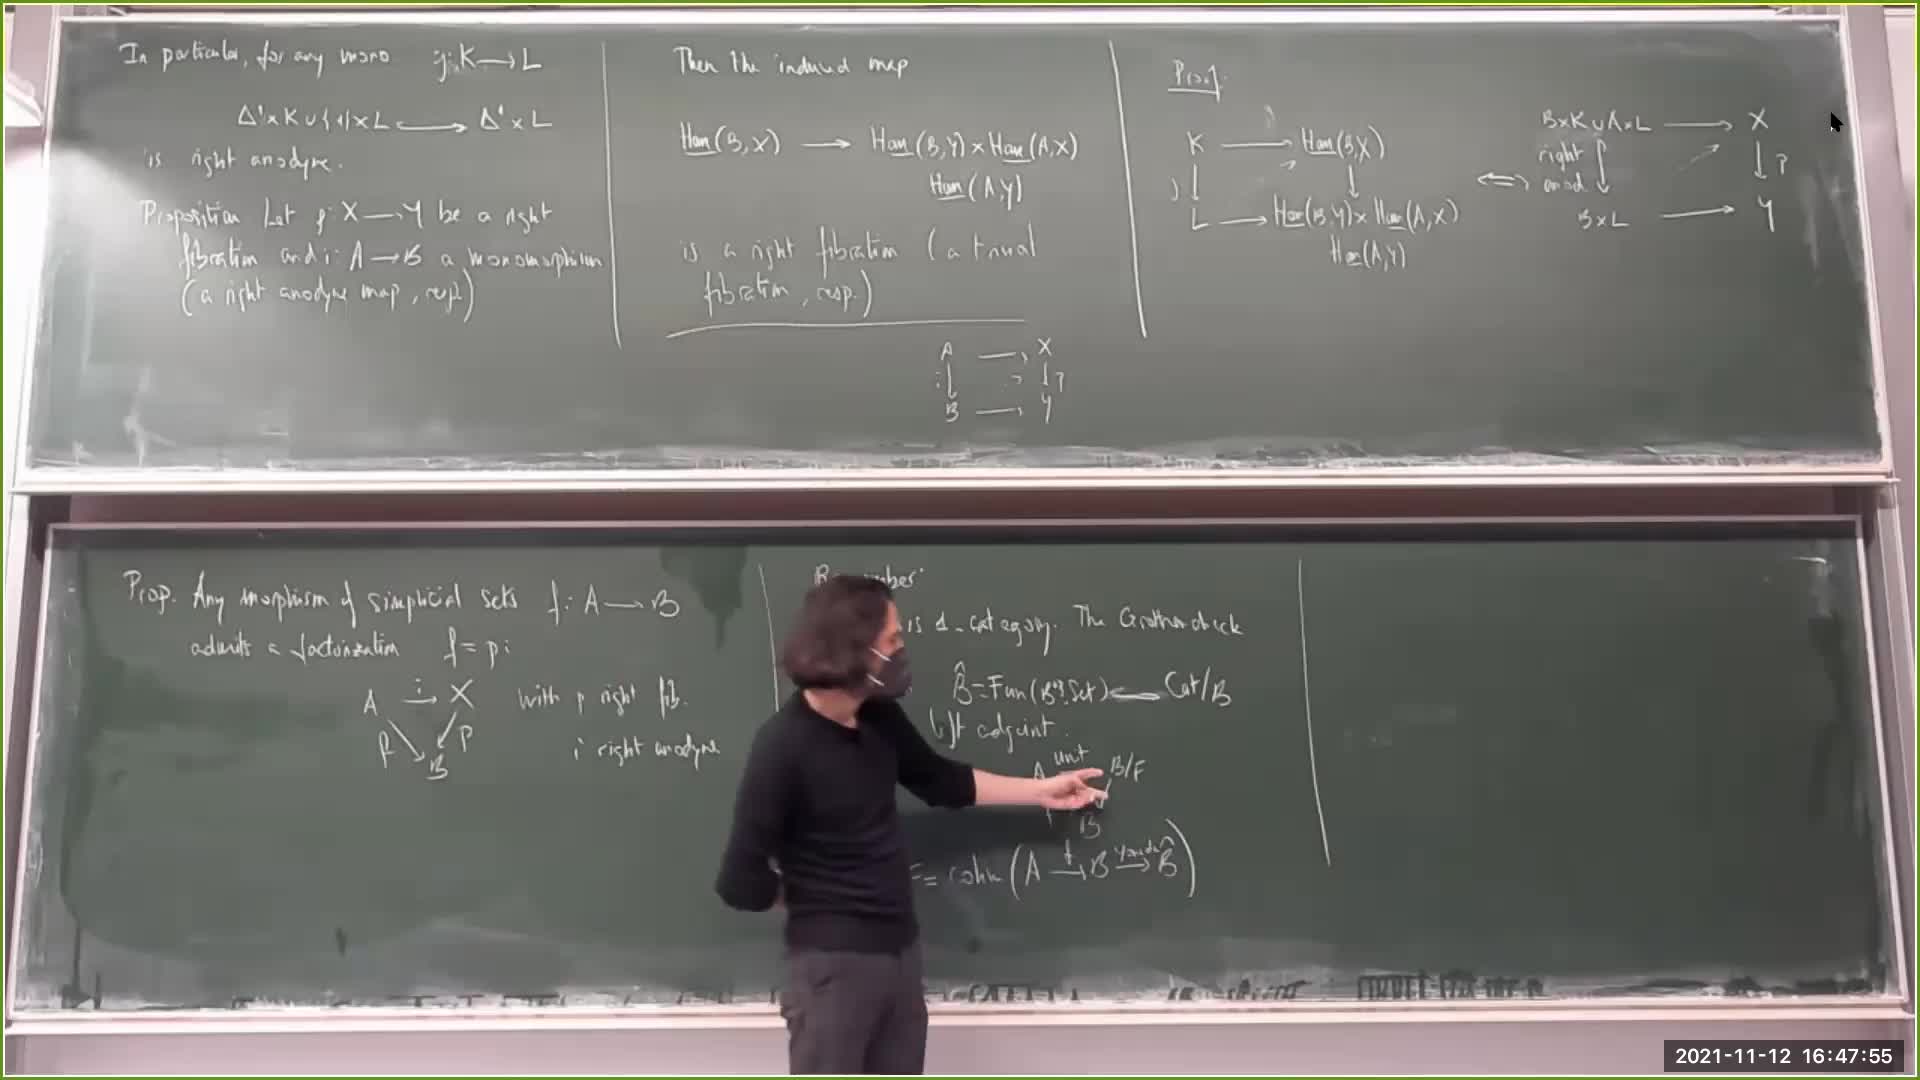 Derived functors and cohomology through higher categories